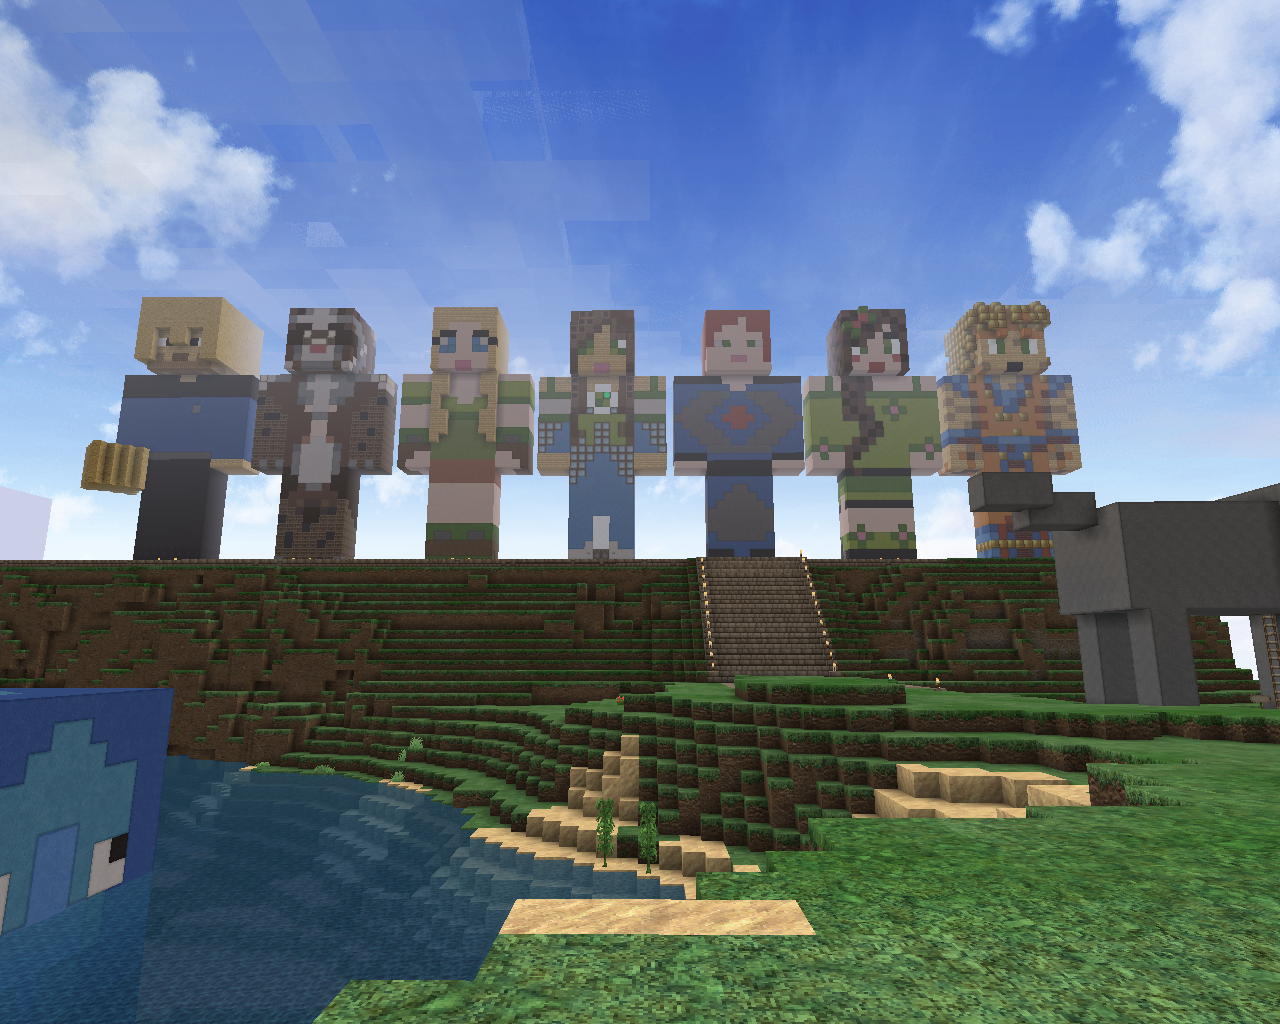 Large statues of Minecraft characters stand on a hill in the game Minecraft.